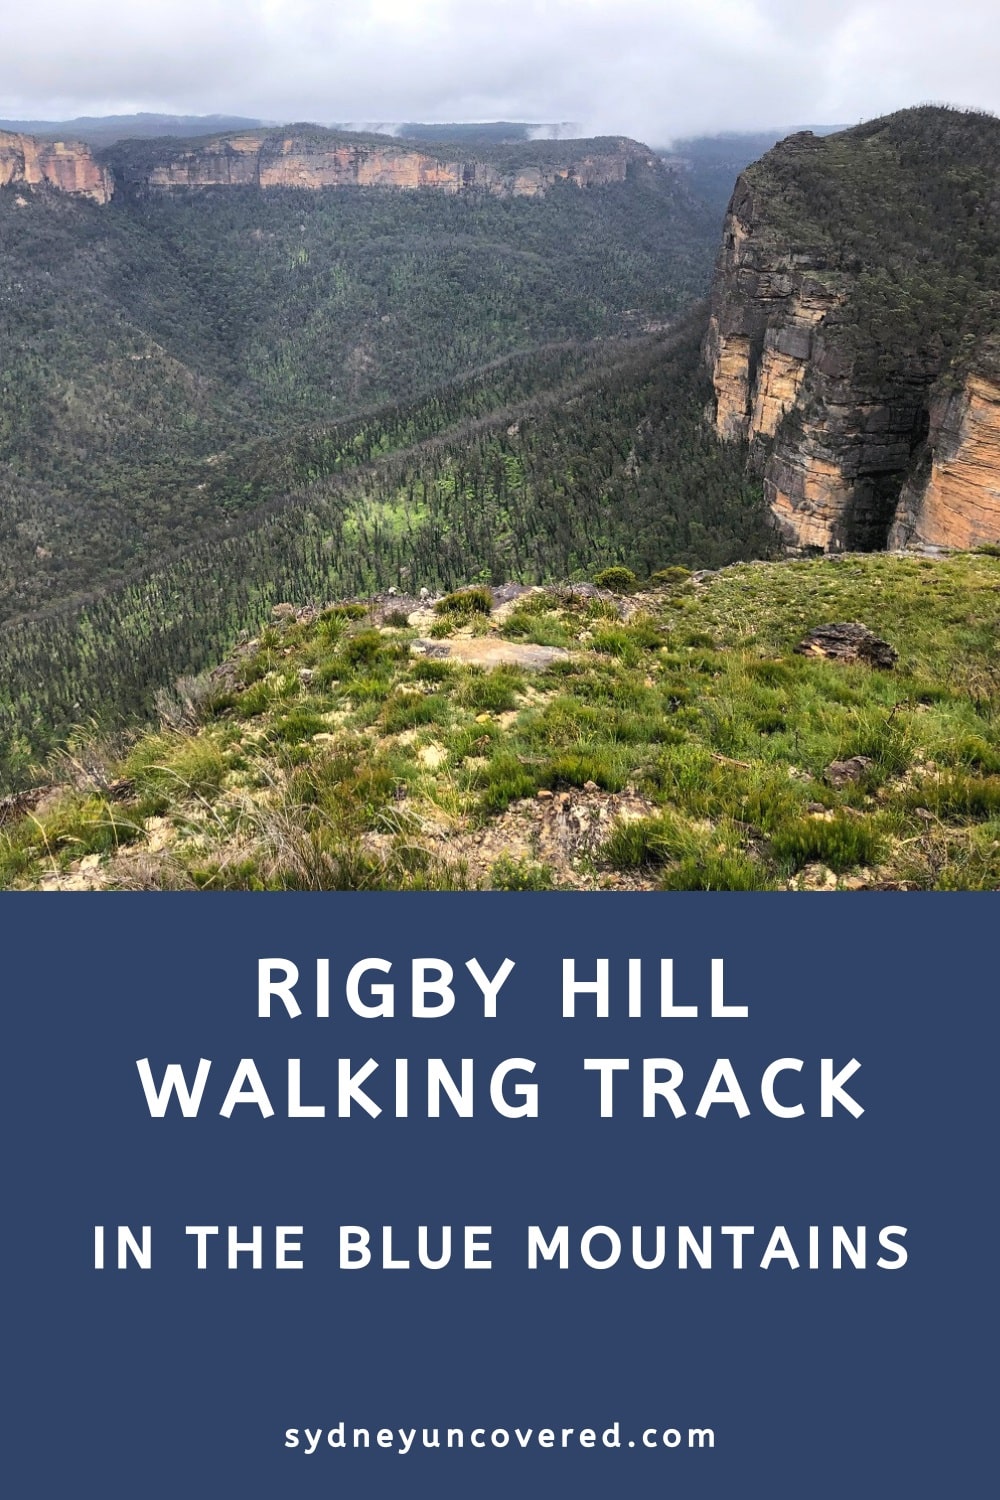 Rigby Hill Walking Track in the Blue Mountains